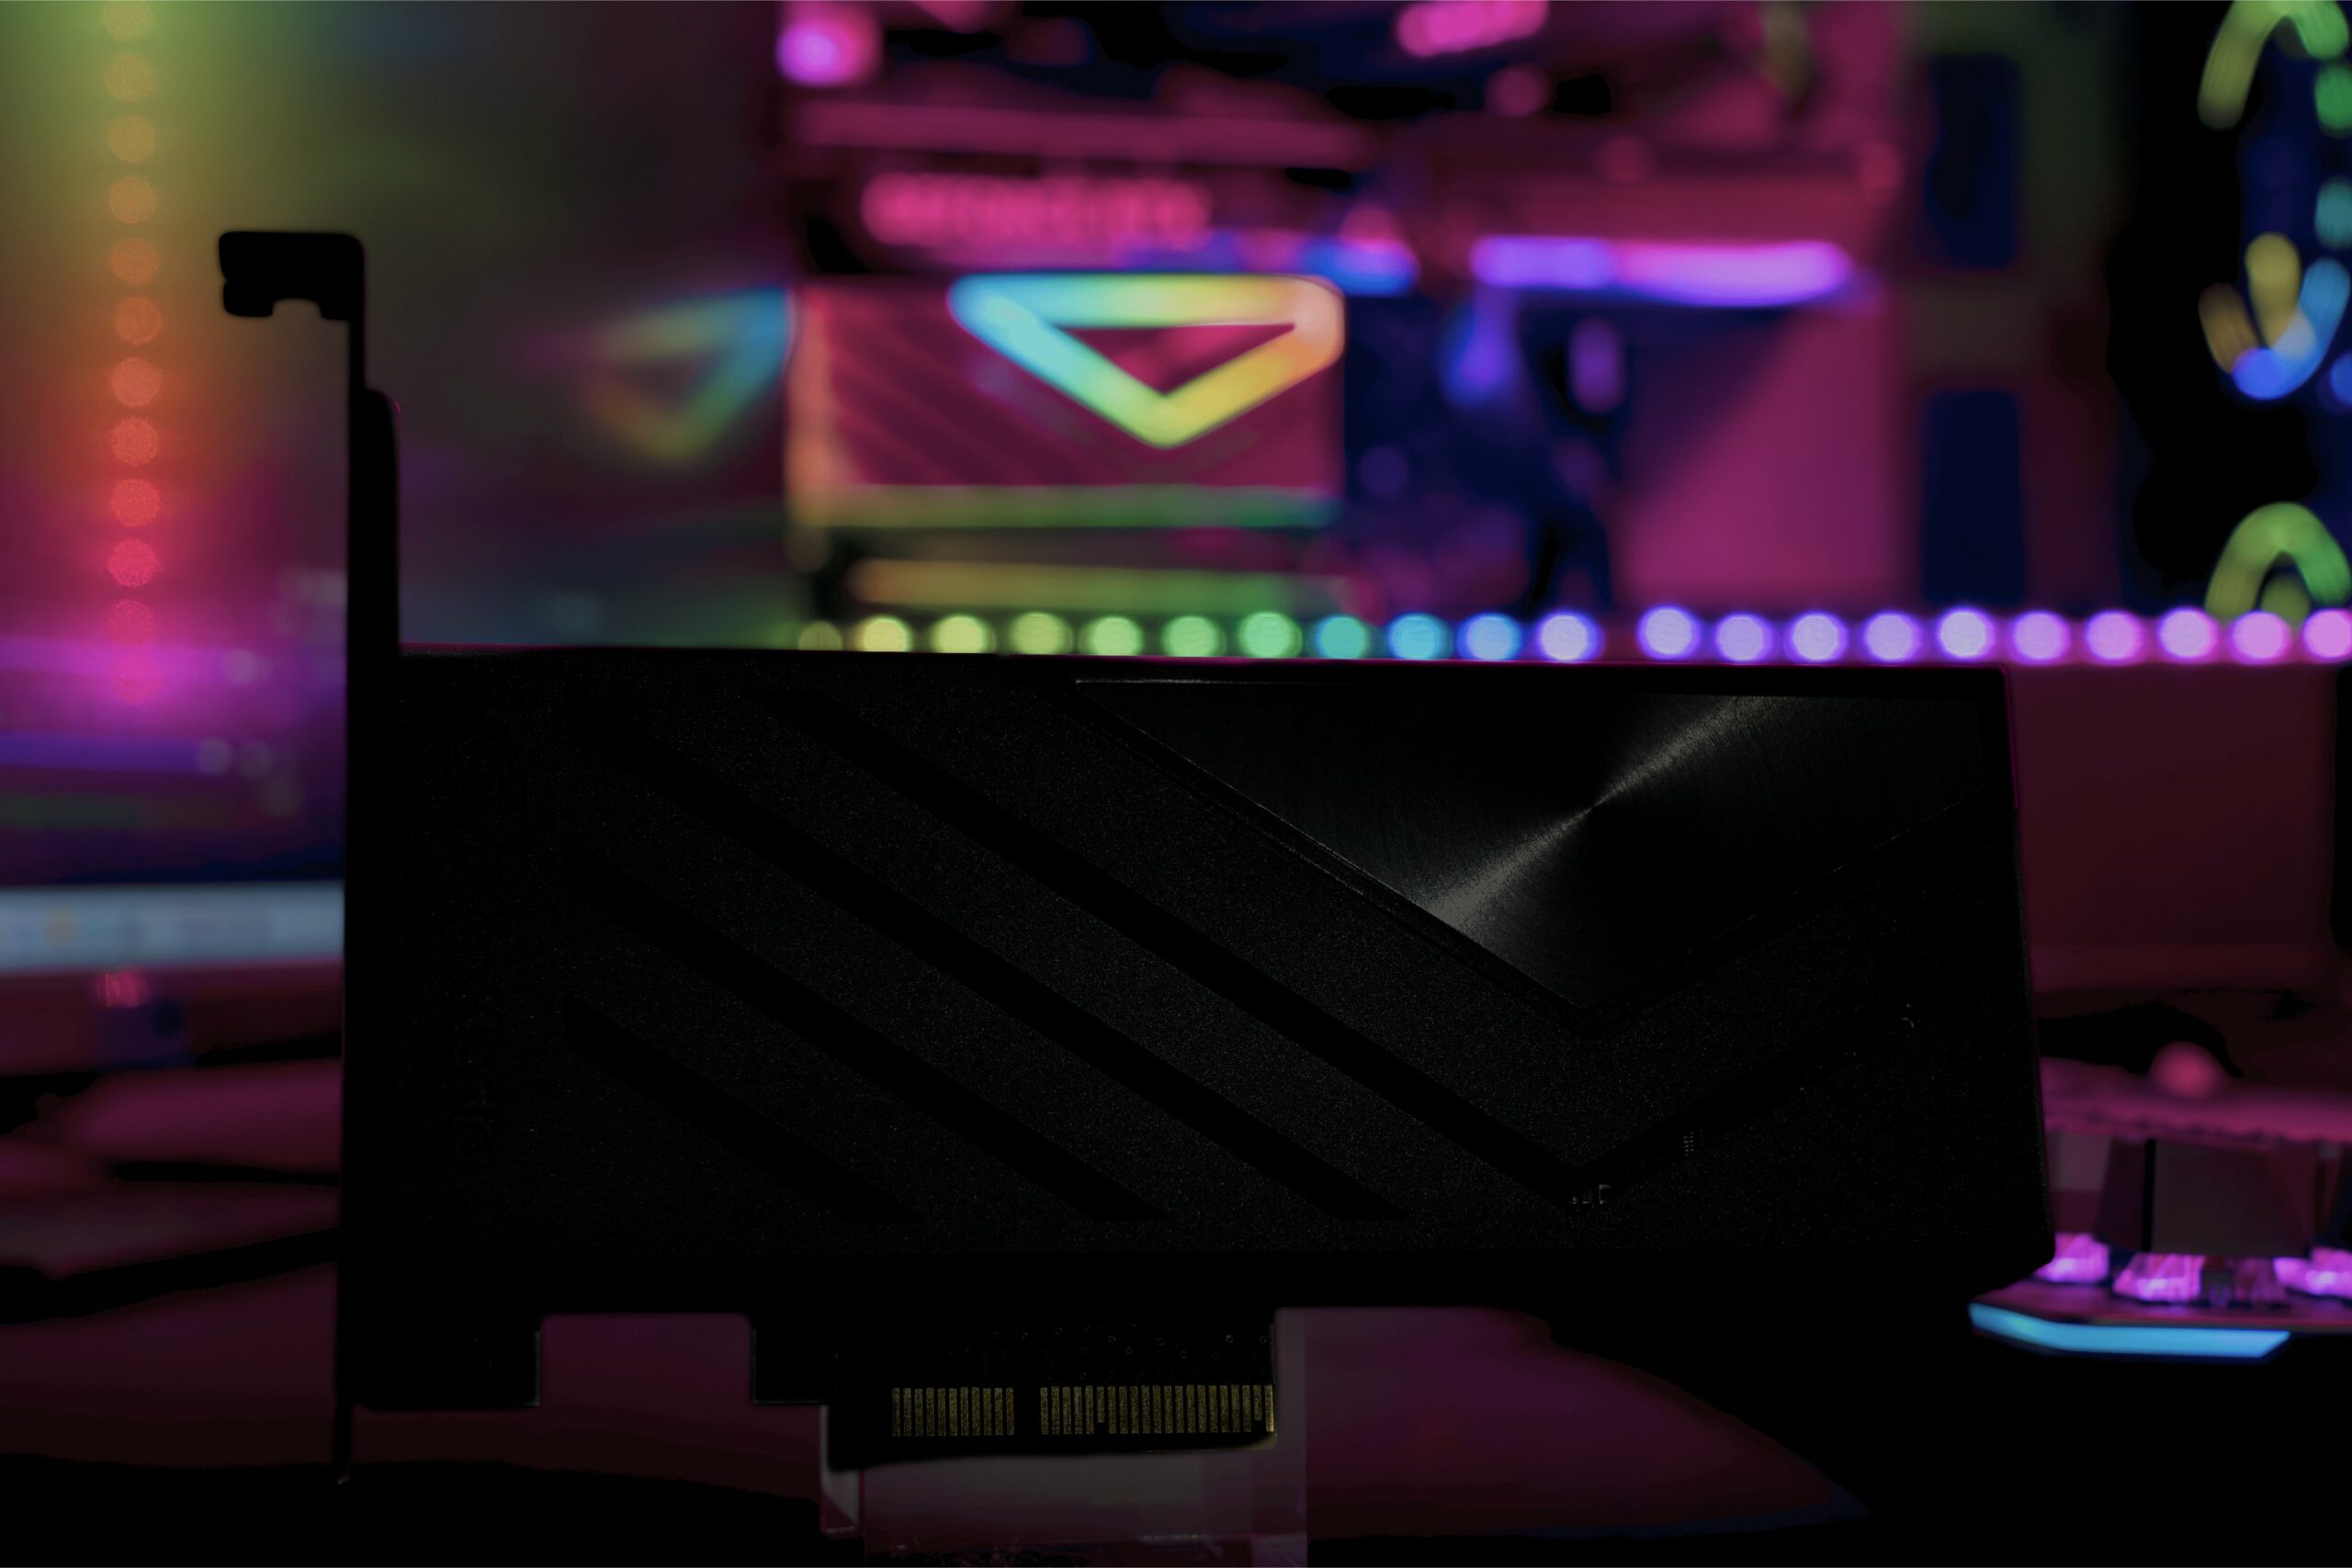 AVerMedia teases a new internal capture card ahead of CES – The Live Gamer 4K 2.1